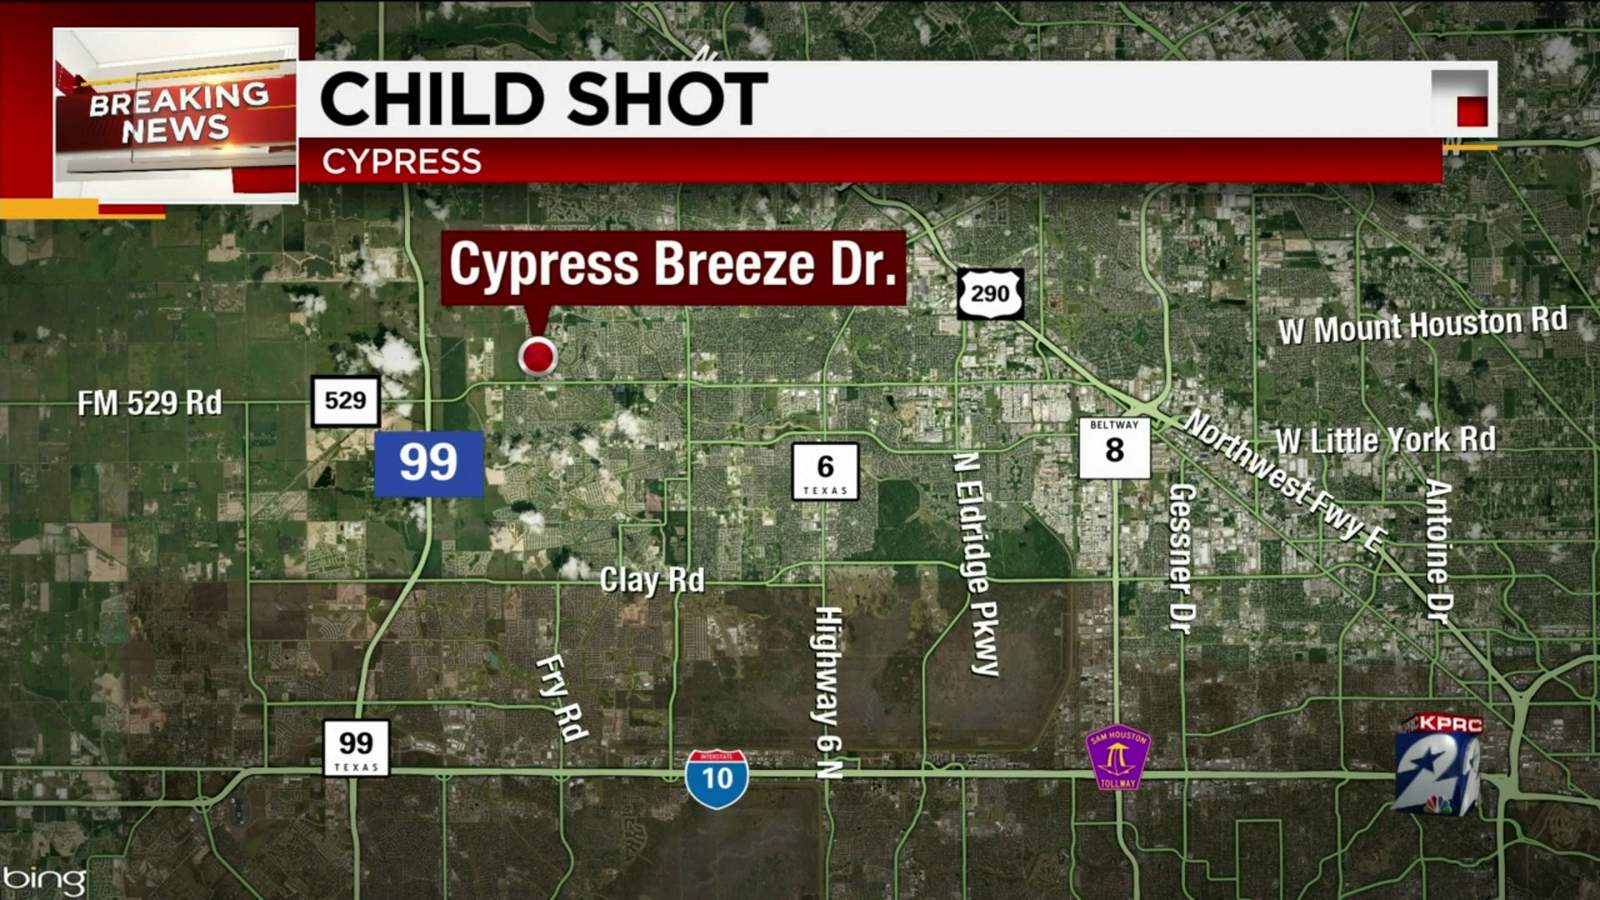 10-year-old accidentally shot by stepfather in Cypress, HCSO says